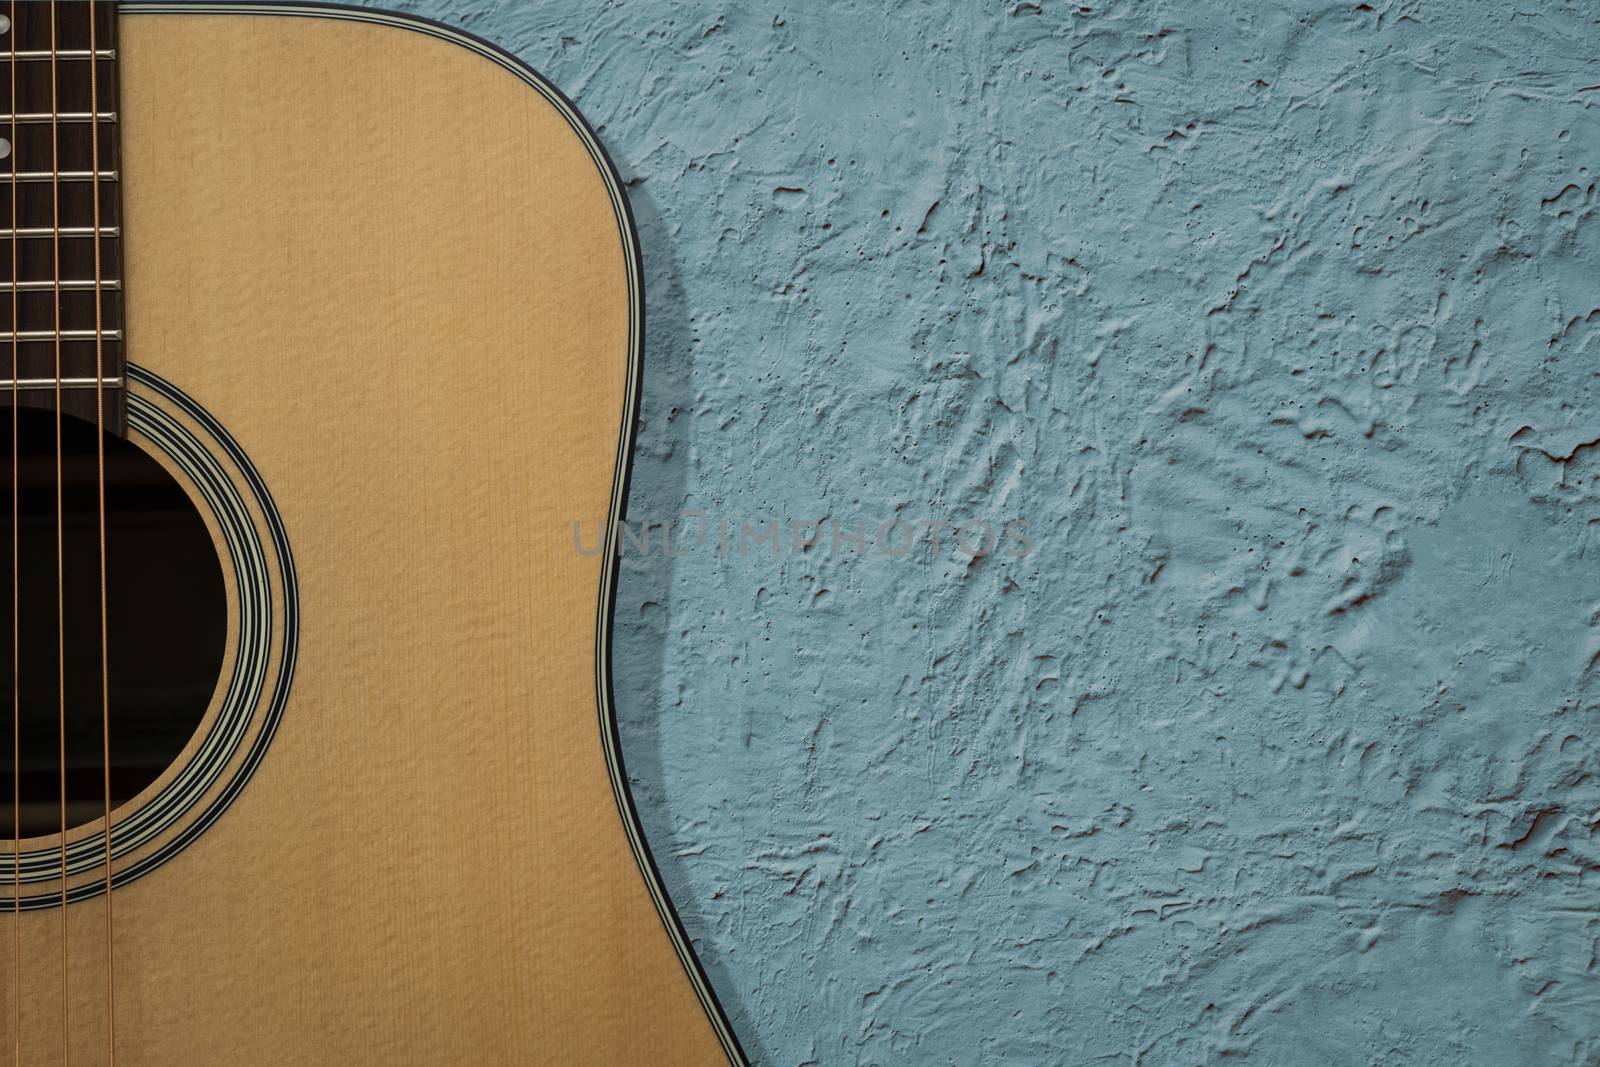 Guitar is a classic instrument on blue cement background with copy space.